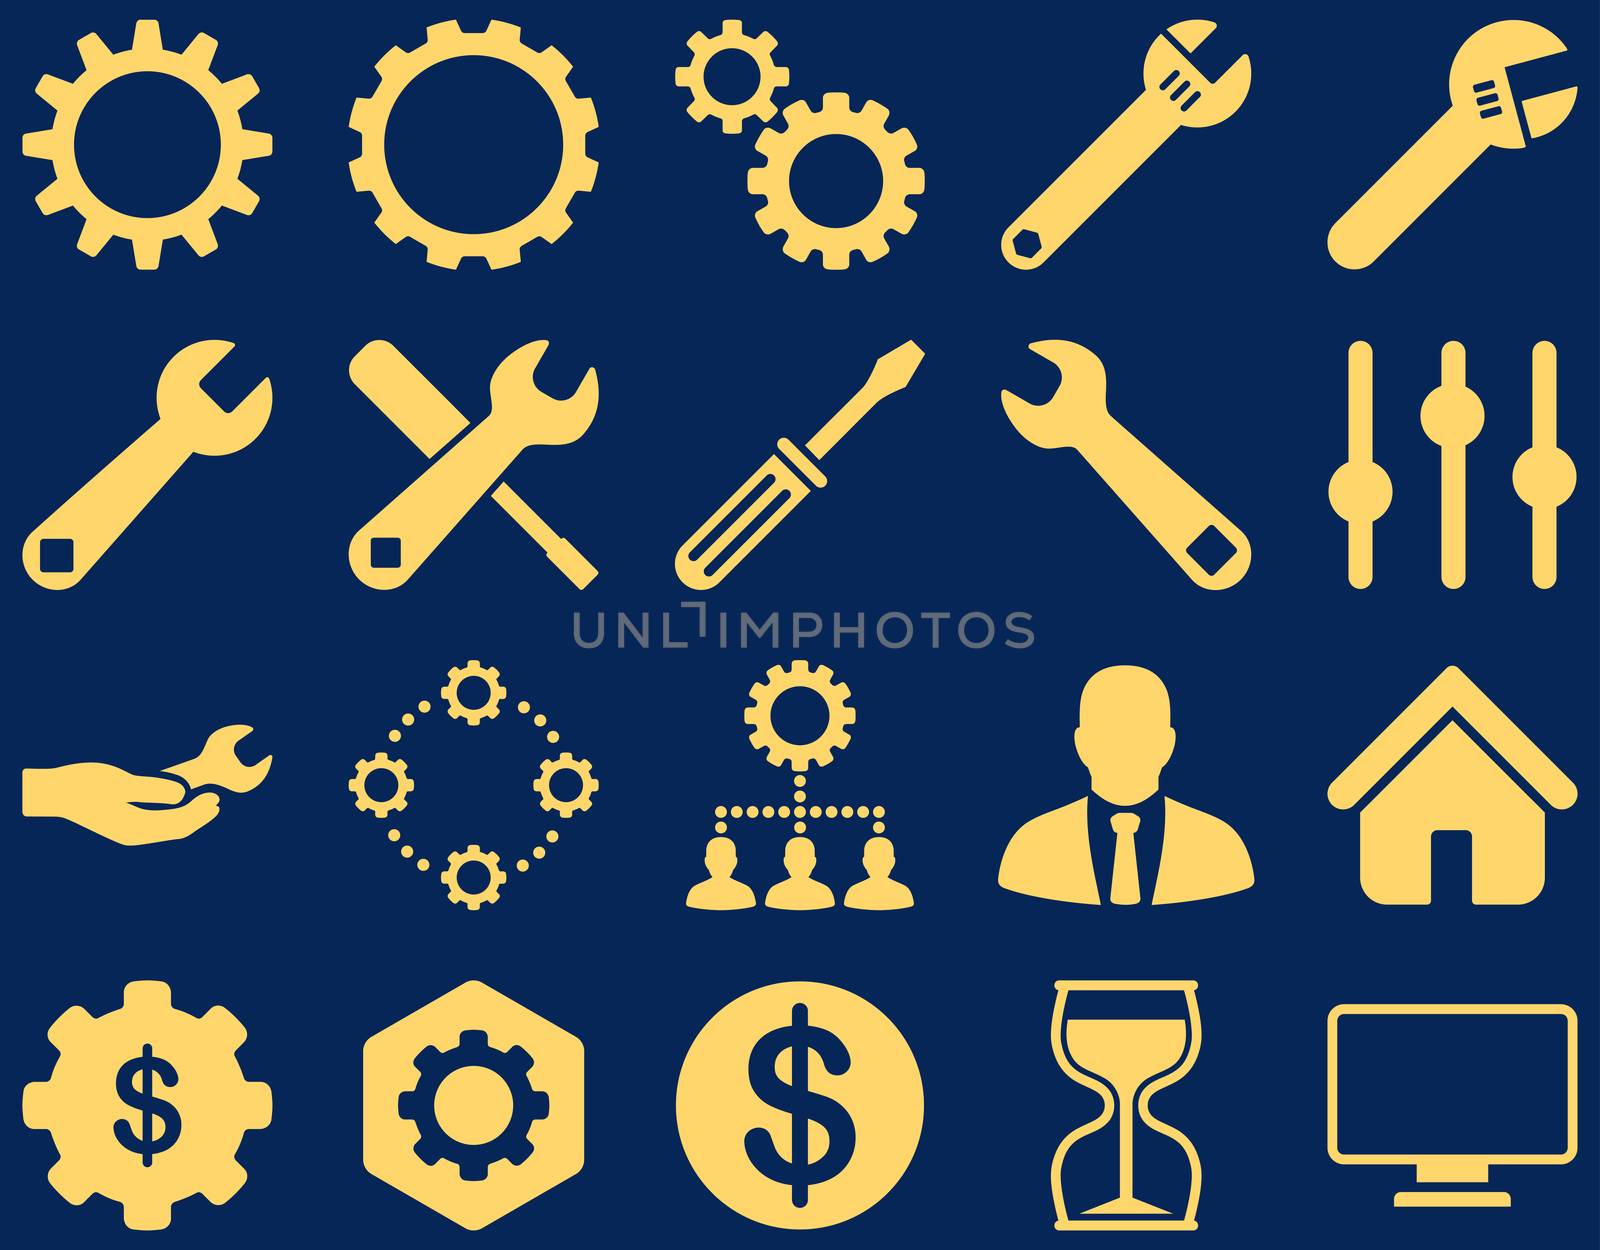 Settings and Tools Icons. Glyph set style is flat images, yellow color, isolated on a blue background.